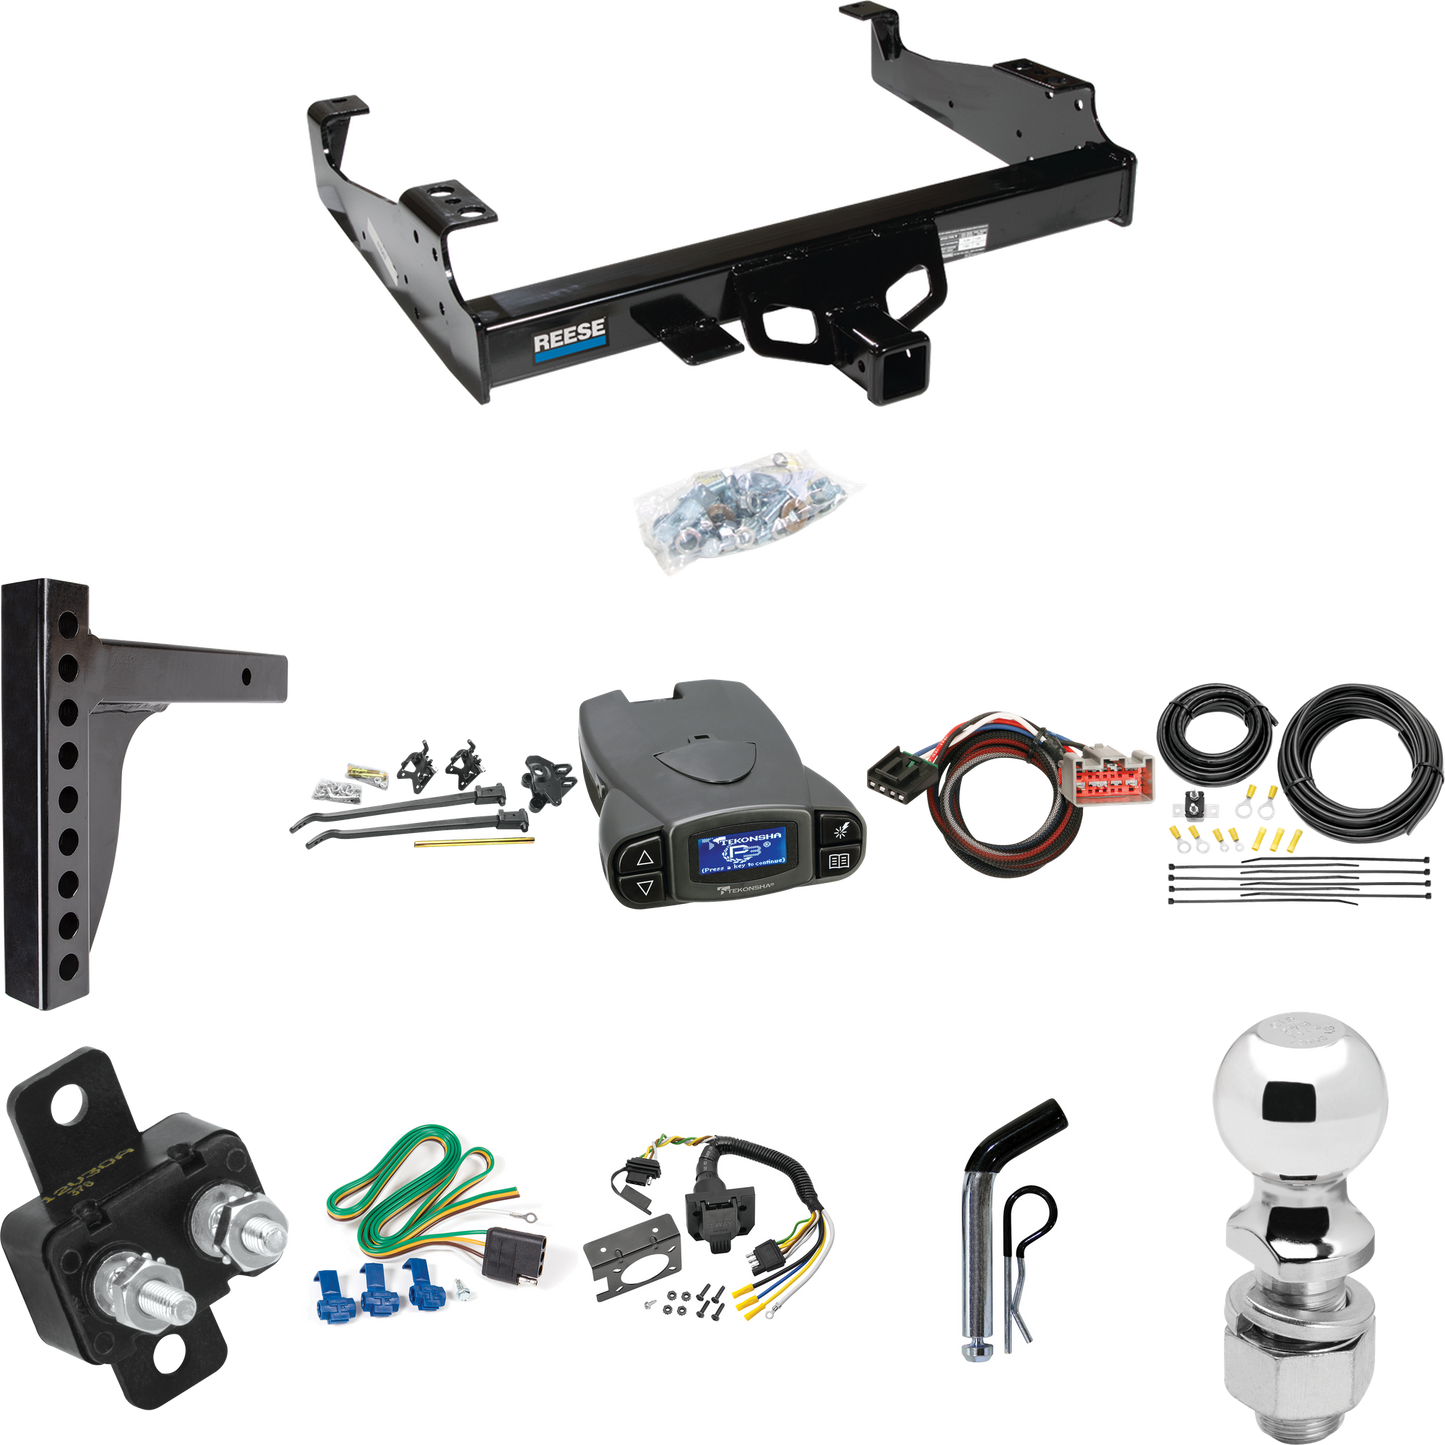 Fits 1999-2004 Ford F-450 Super Duty Trailer Hitch Tow PKG w/ 12K Trunnion Bar Weight Distribution Hitch + Pin/Clip + 2-5/16" Ball + Tekonsha Prodigy P3 Brake Control + Plug & Play BC Adapter + 7-Way RV Wiring (For Cab & Chassis, w/34" Wide Frames Mo